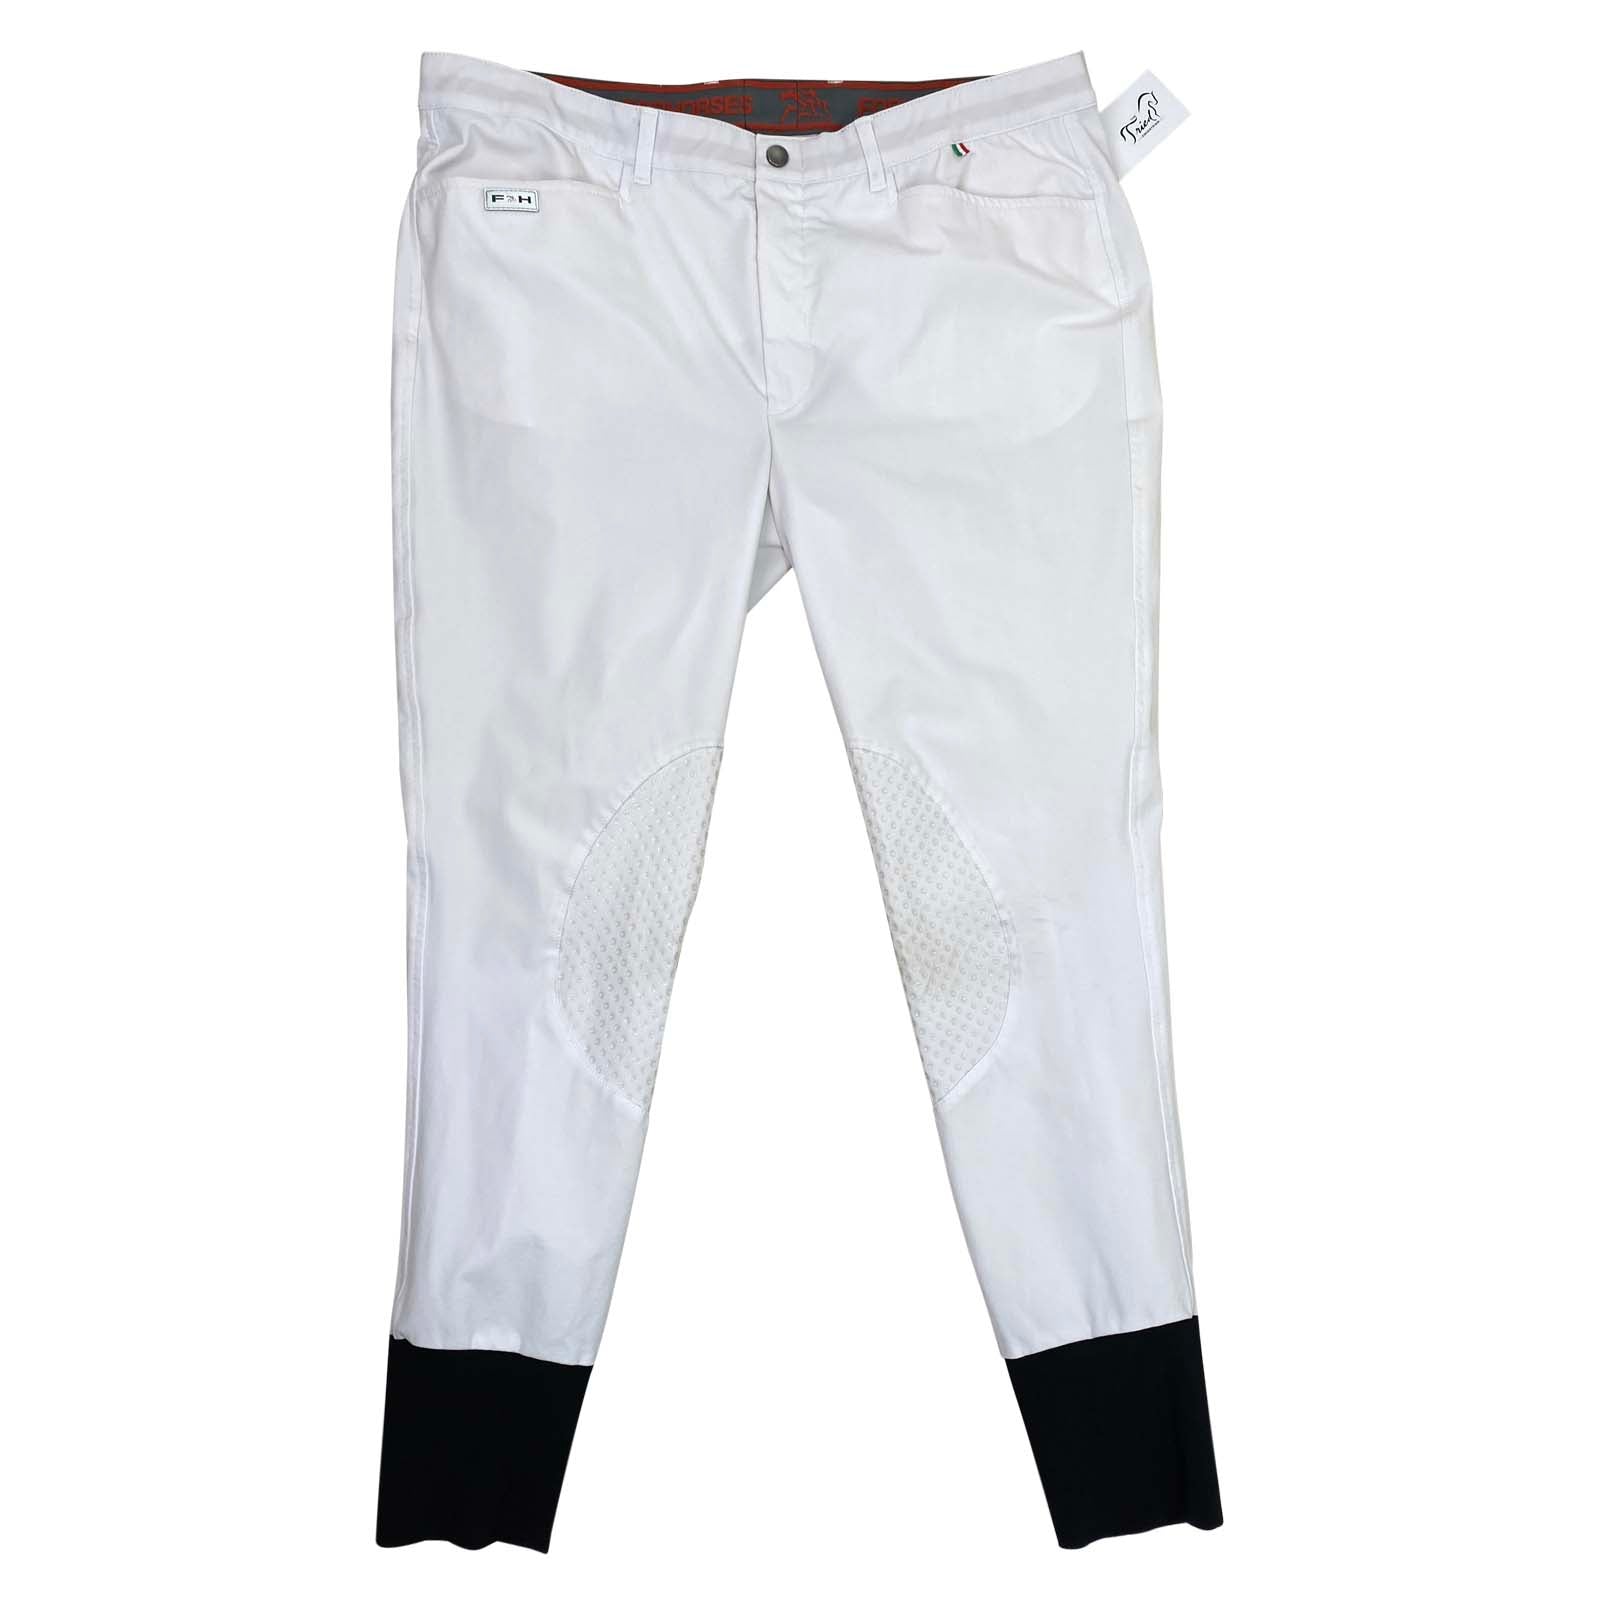 For Horses 'Miky' Breeches in White